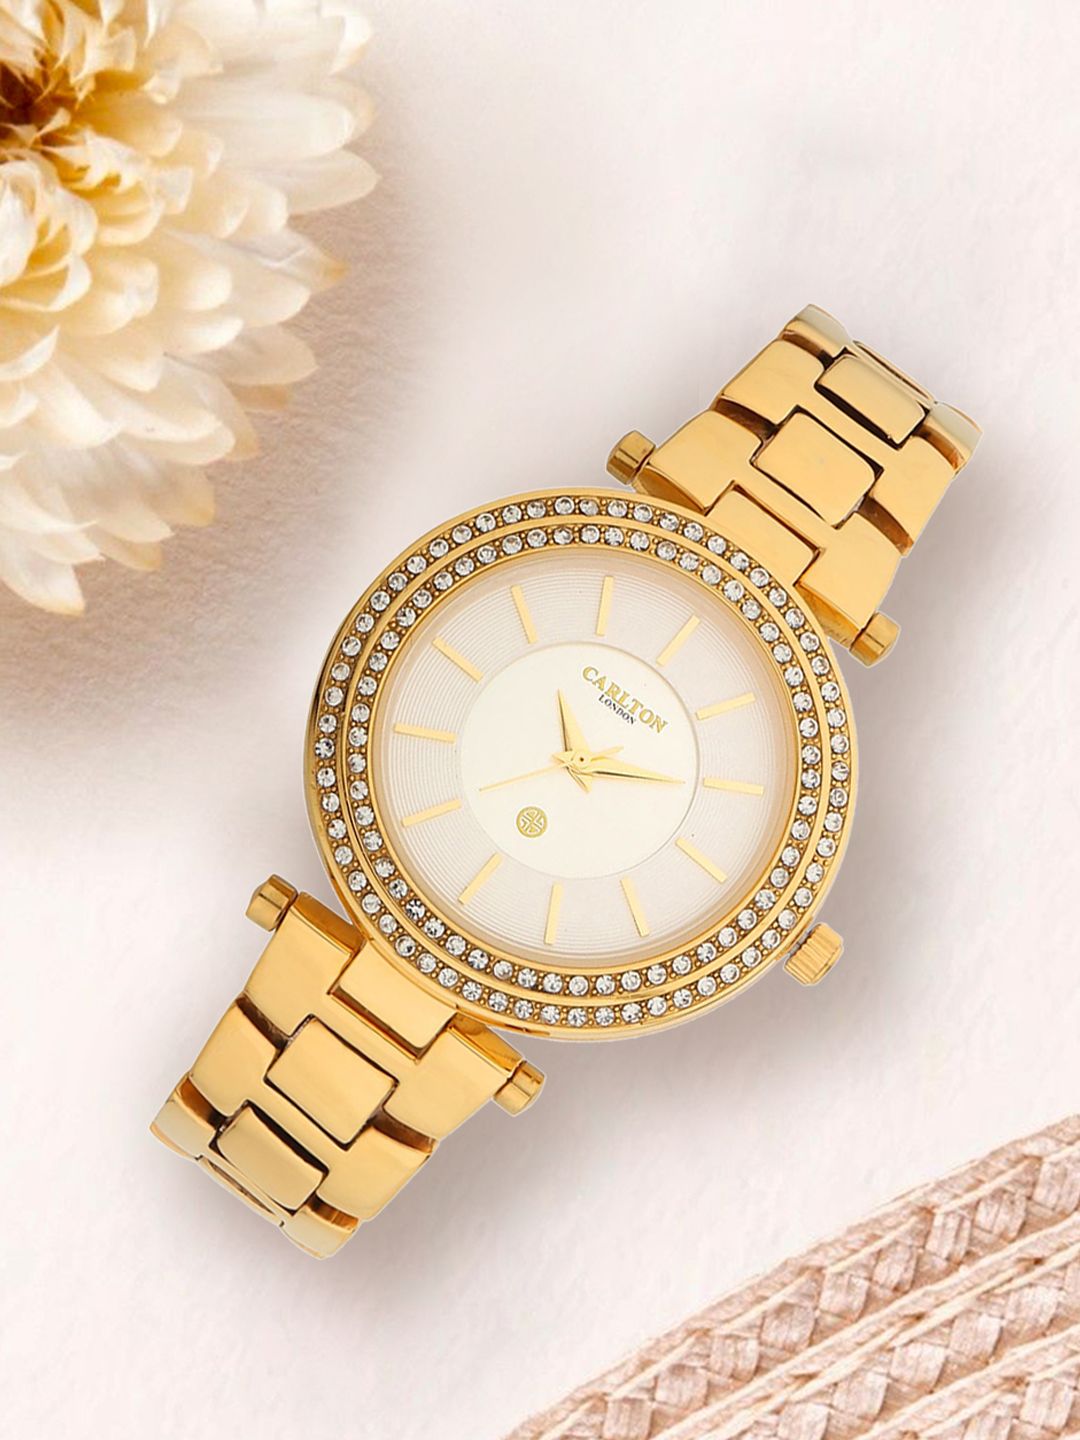 Carlton London Women Gold-Toned & White Analogue Watch CL040GSLG Price in India